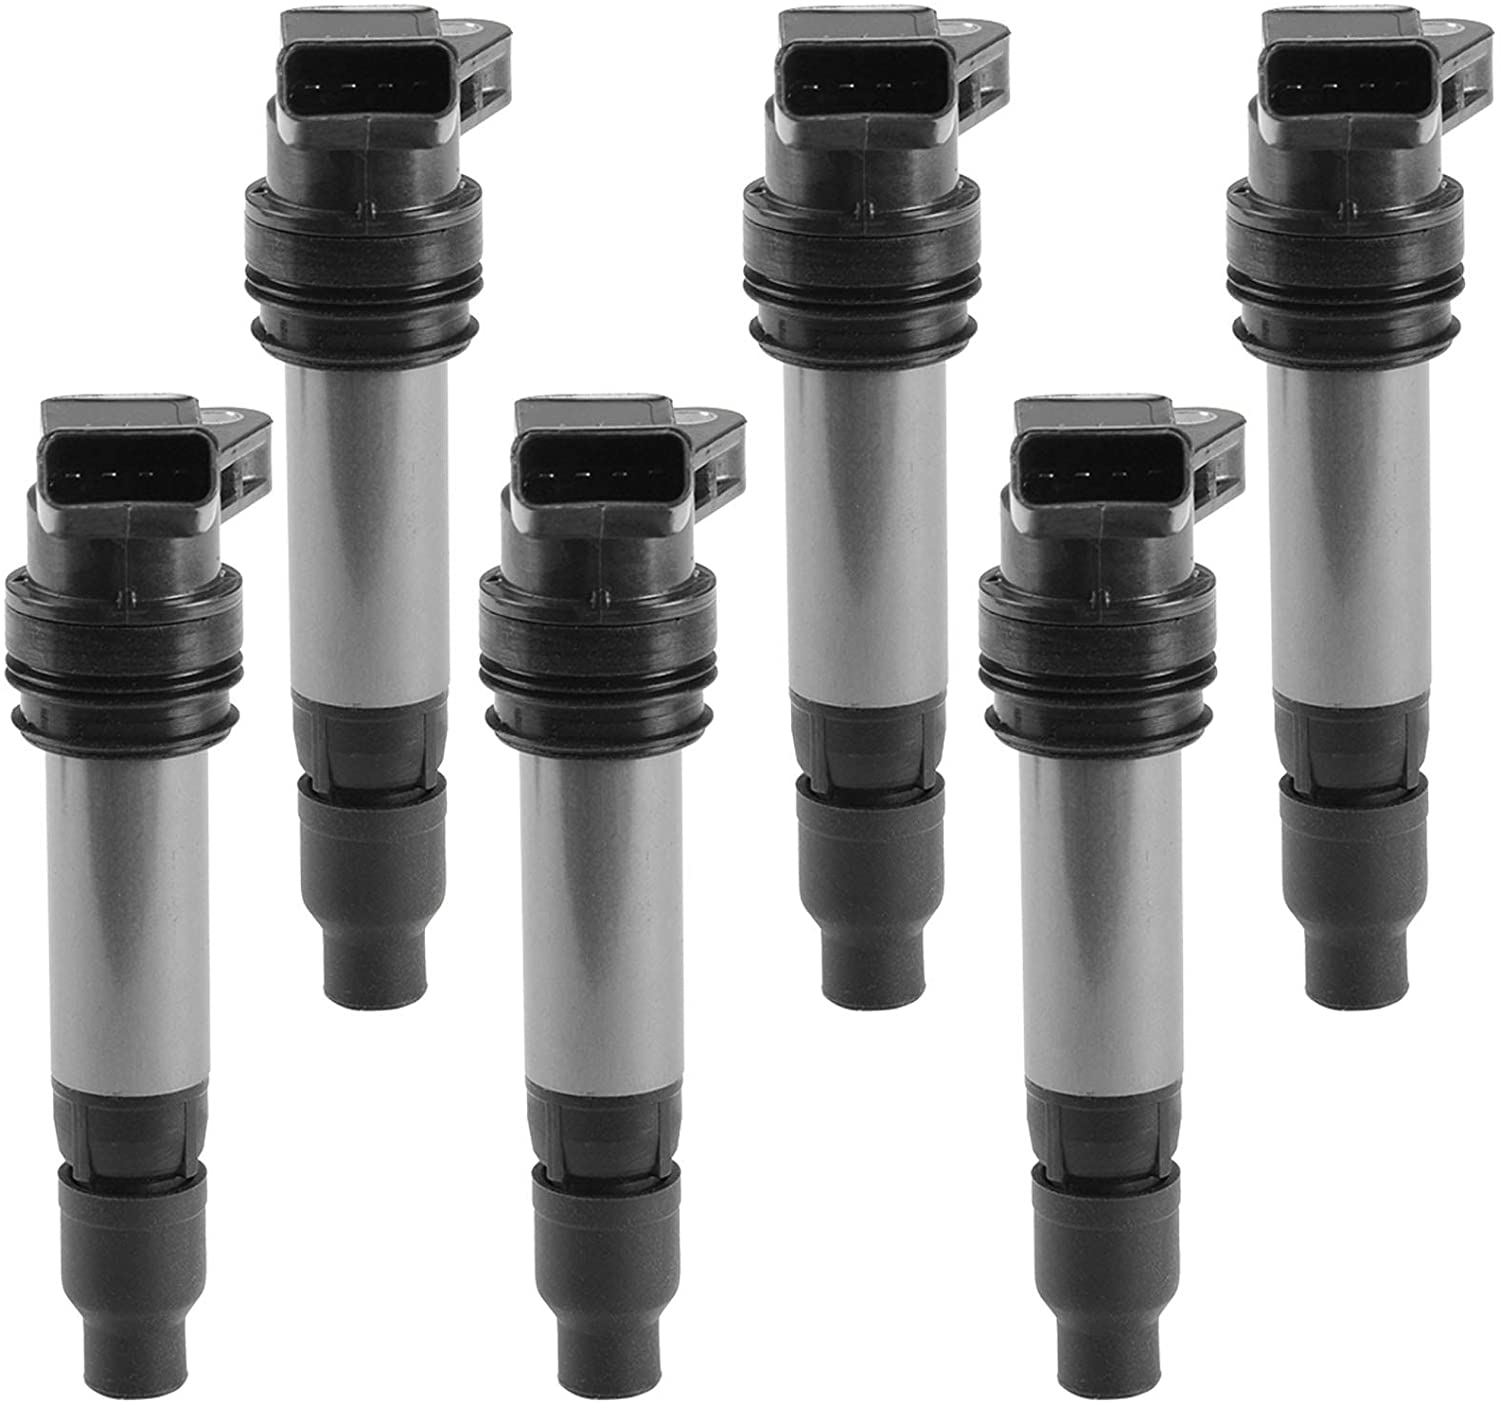 A-Premium Ignition Coil Pack Compatible with Land Rover LR2 Volvo S60 S80 V70 XC60 XC70 XC90 L6 3.0L 3.2L 6-PC